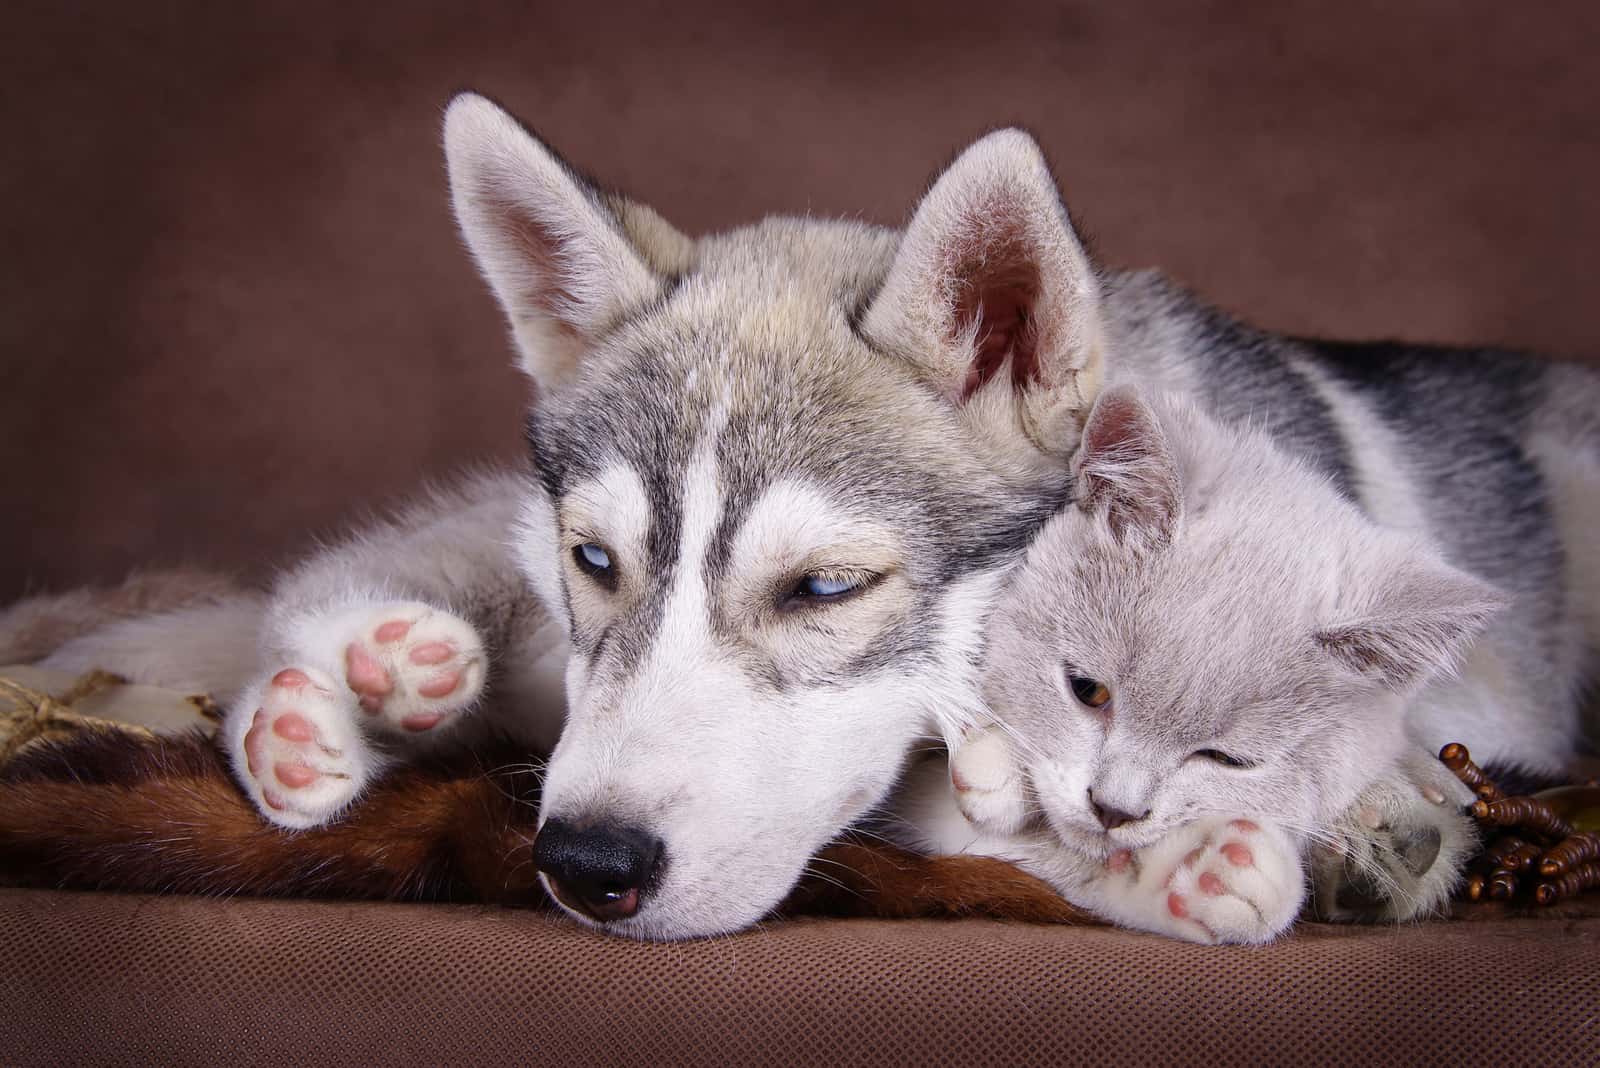 husky and cat posing for camera